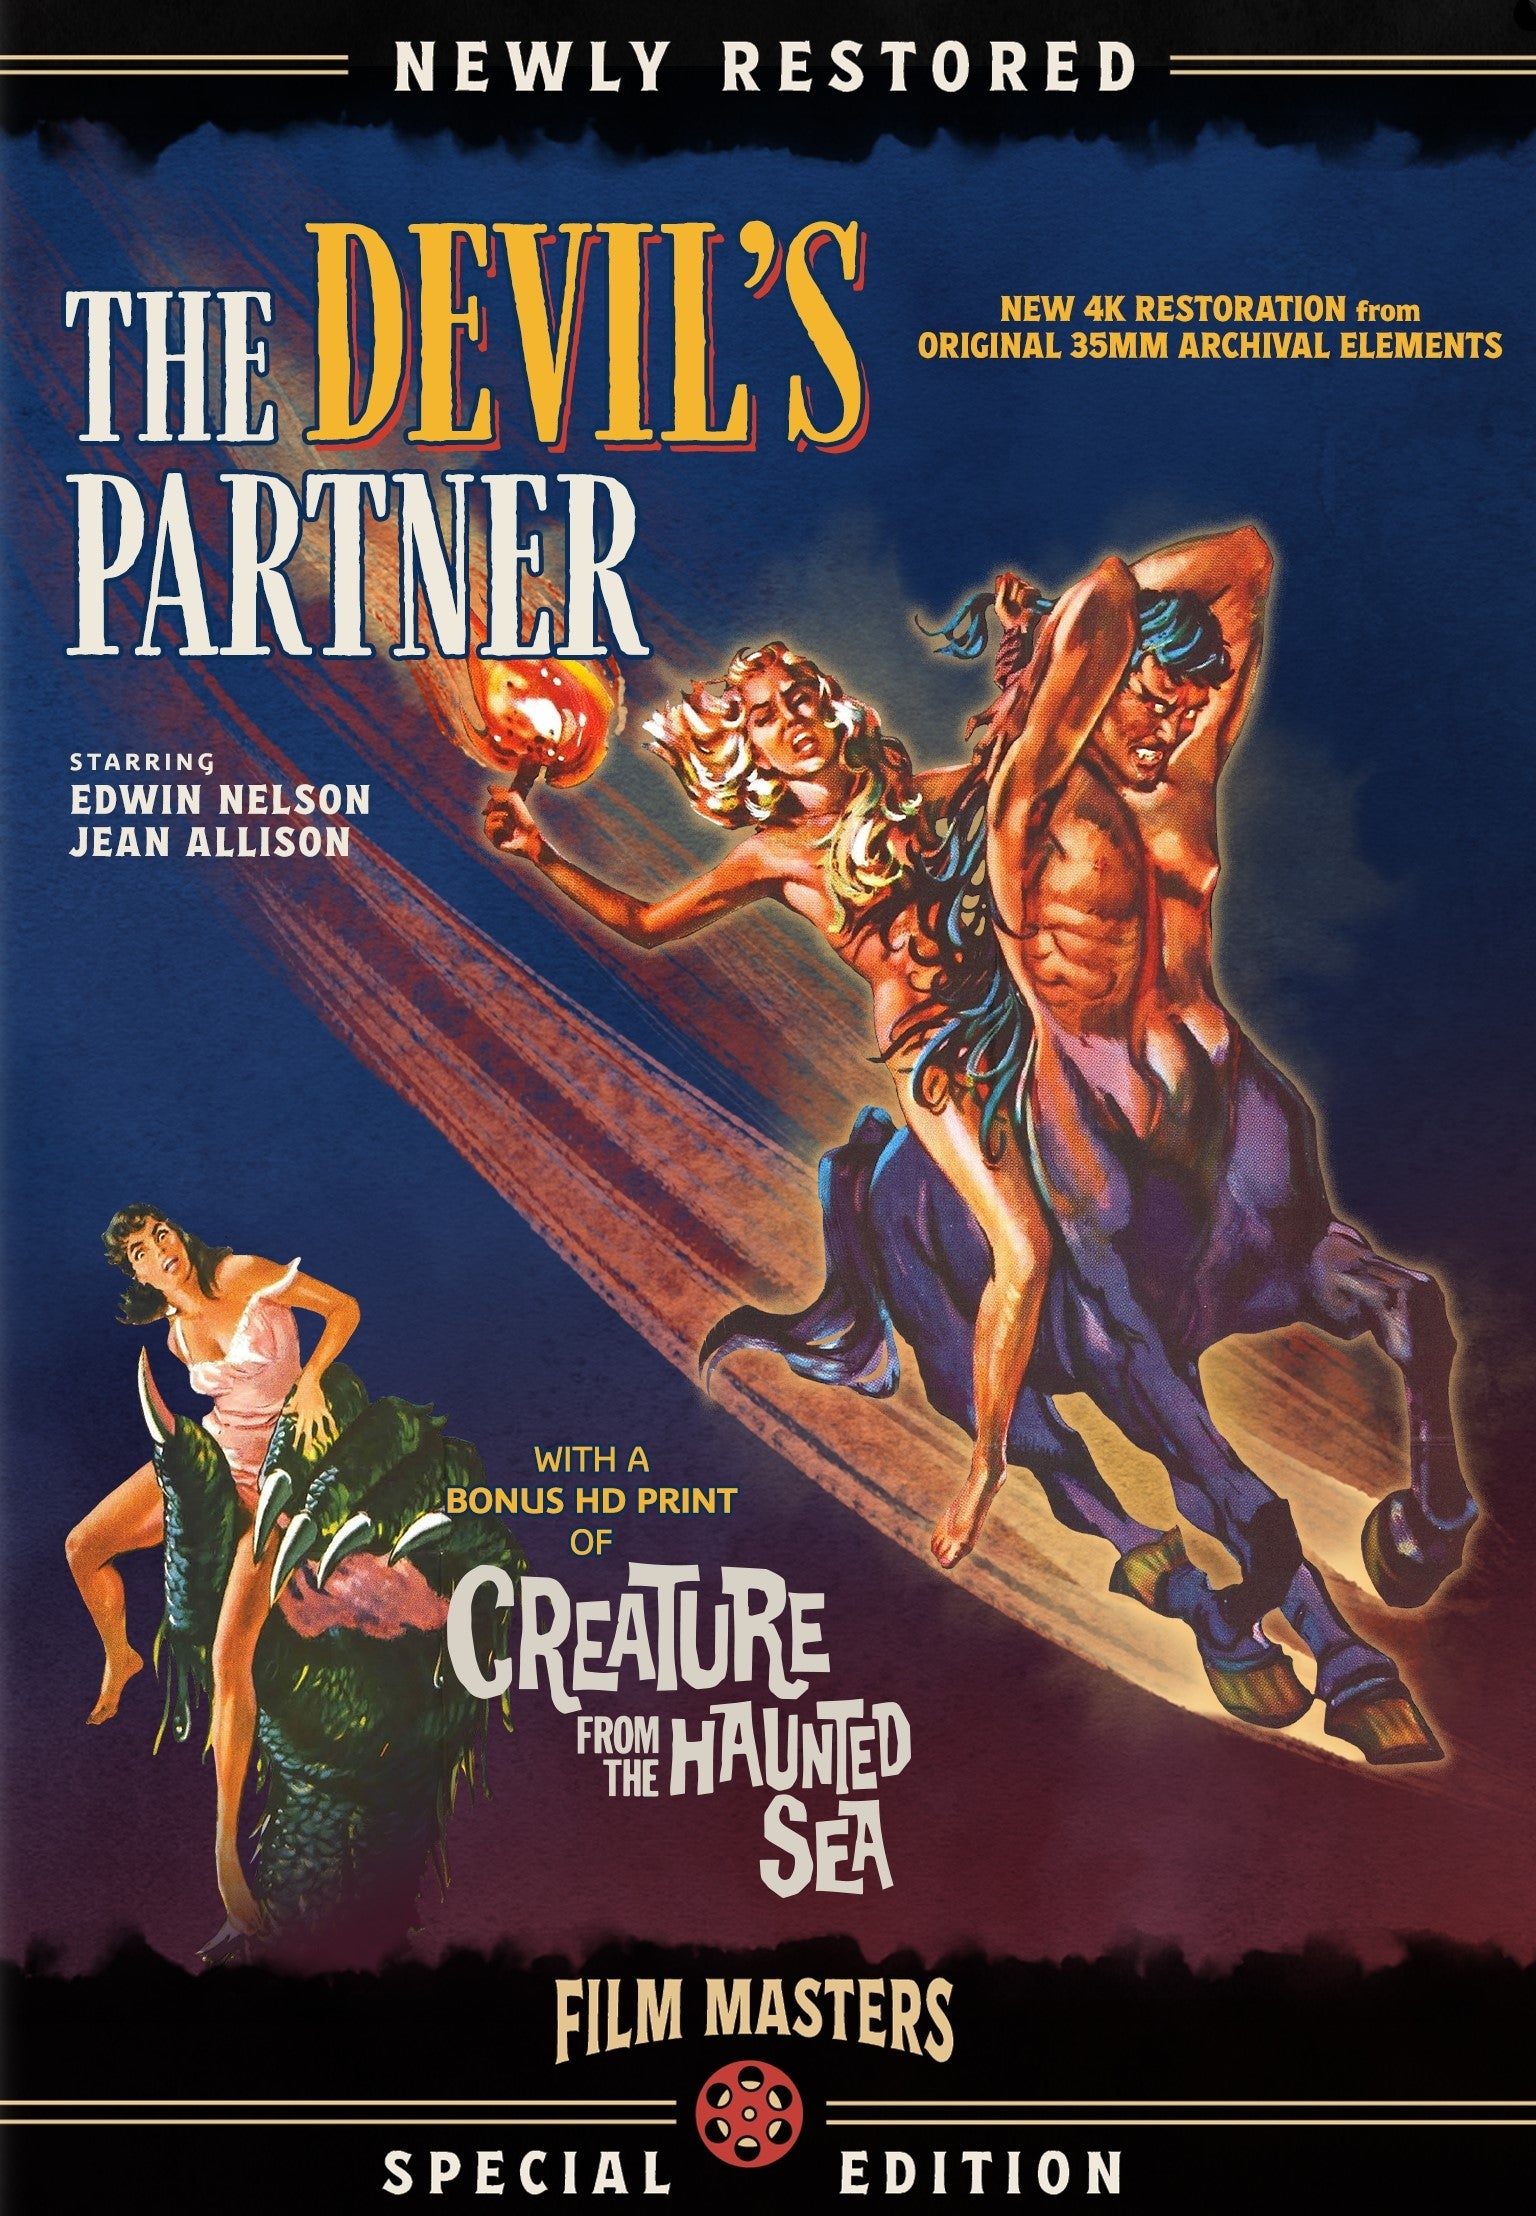 THE DEVIL'S PARTNER / CREATURE FROM THE HAUNTED SEA DVD